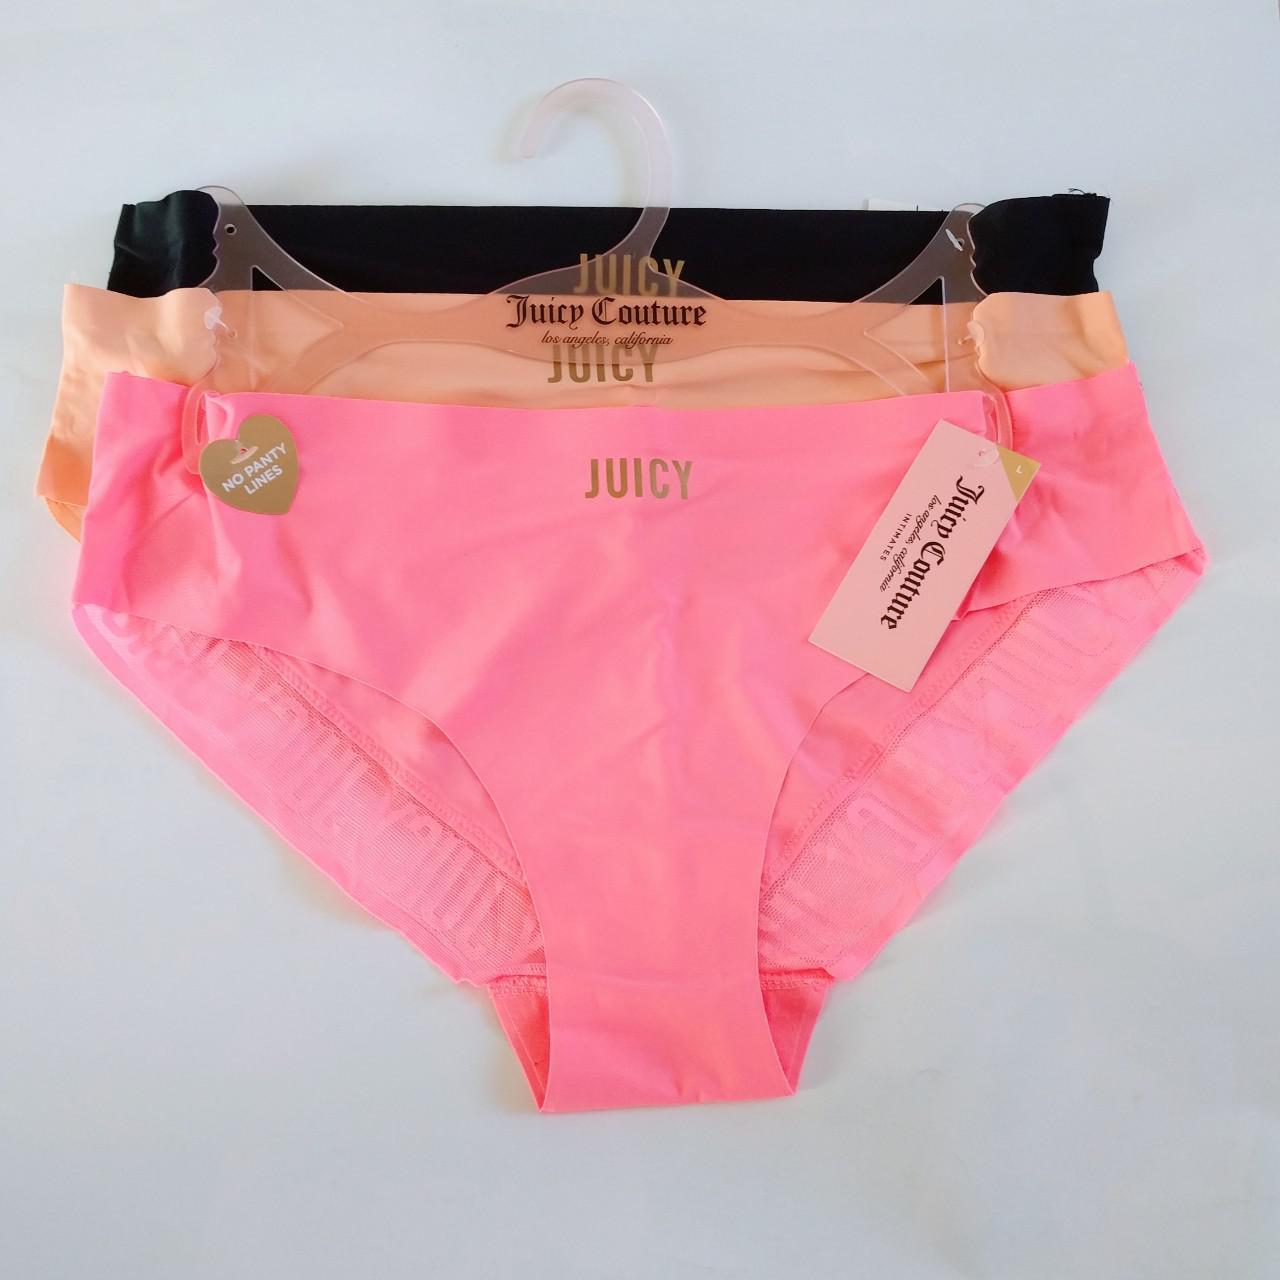 New with tags. Juicy Couture Intimate No Panty Line - Depop